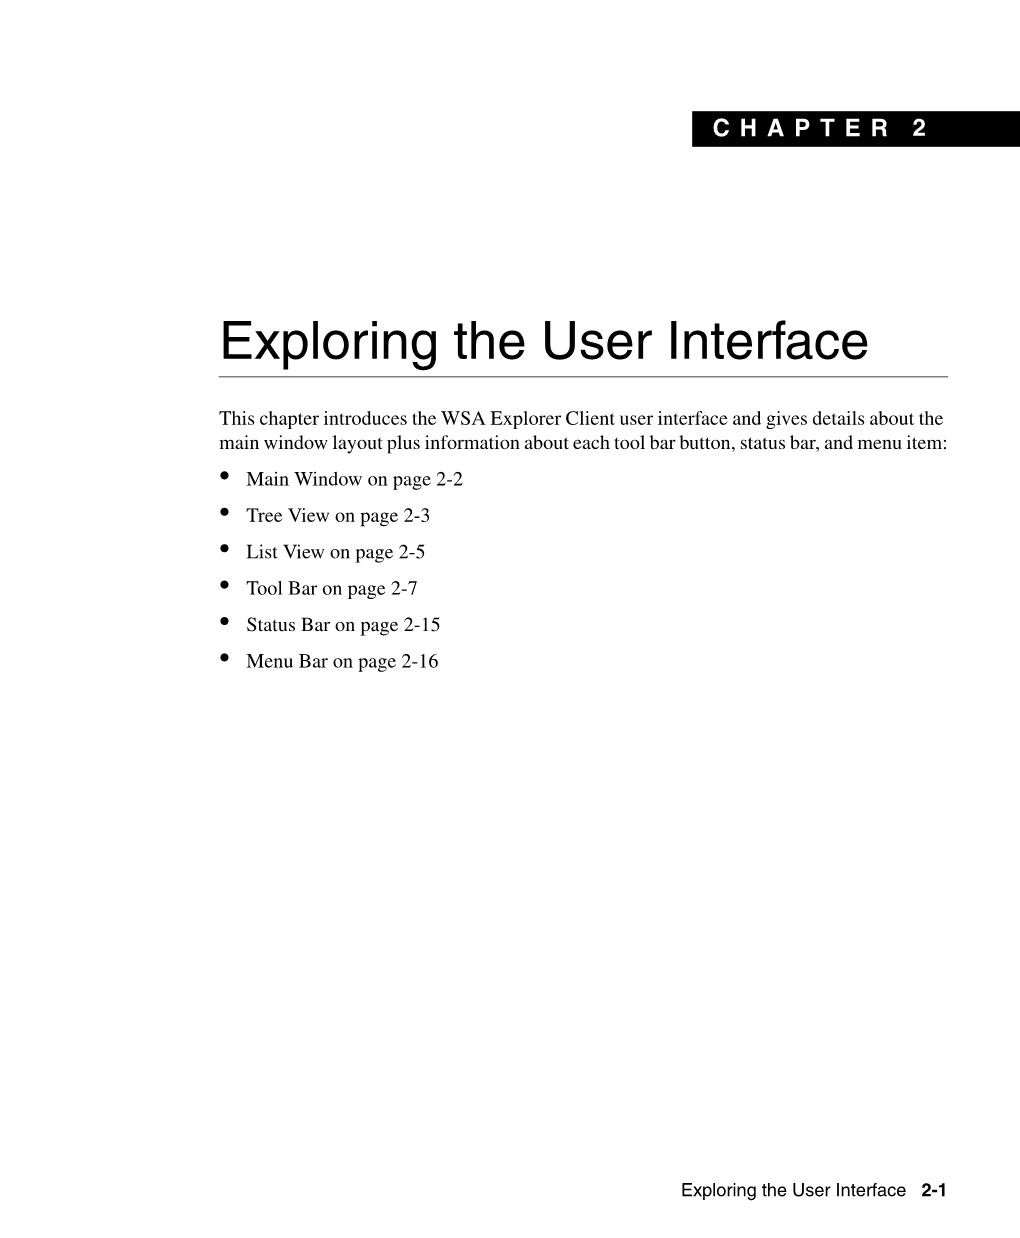 Exploring the User Interface